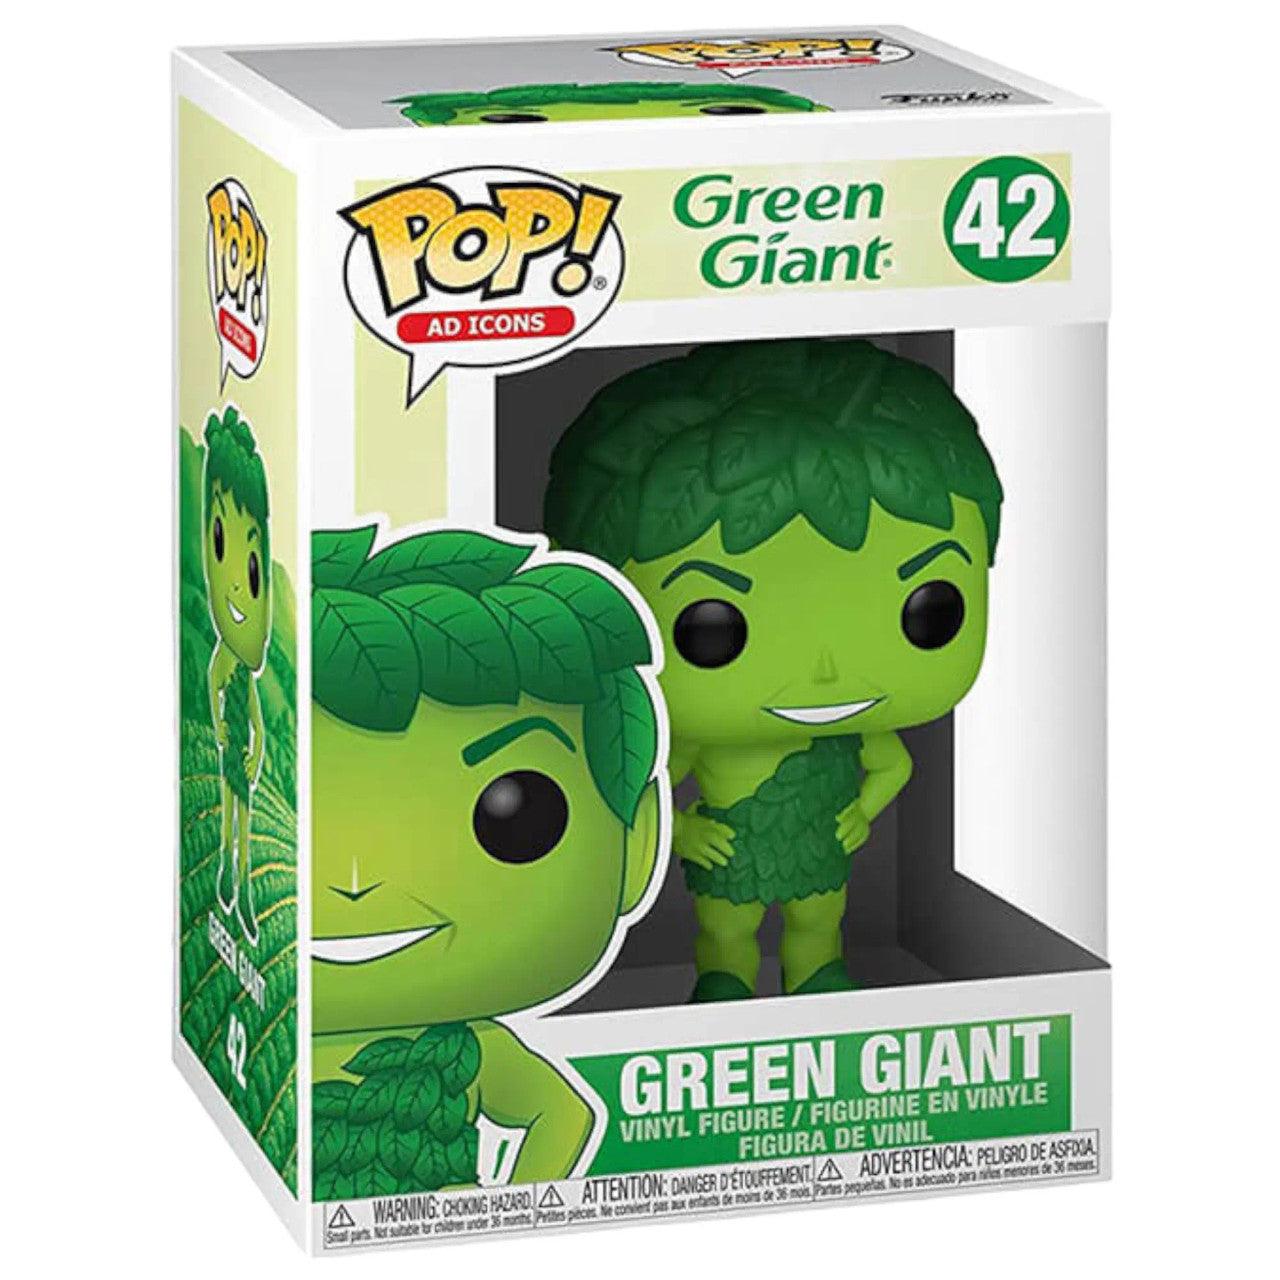 Pop! Ad Icons - Green Giant - #42 - Hobby Champion Inc